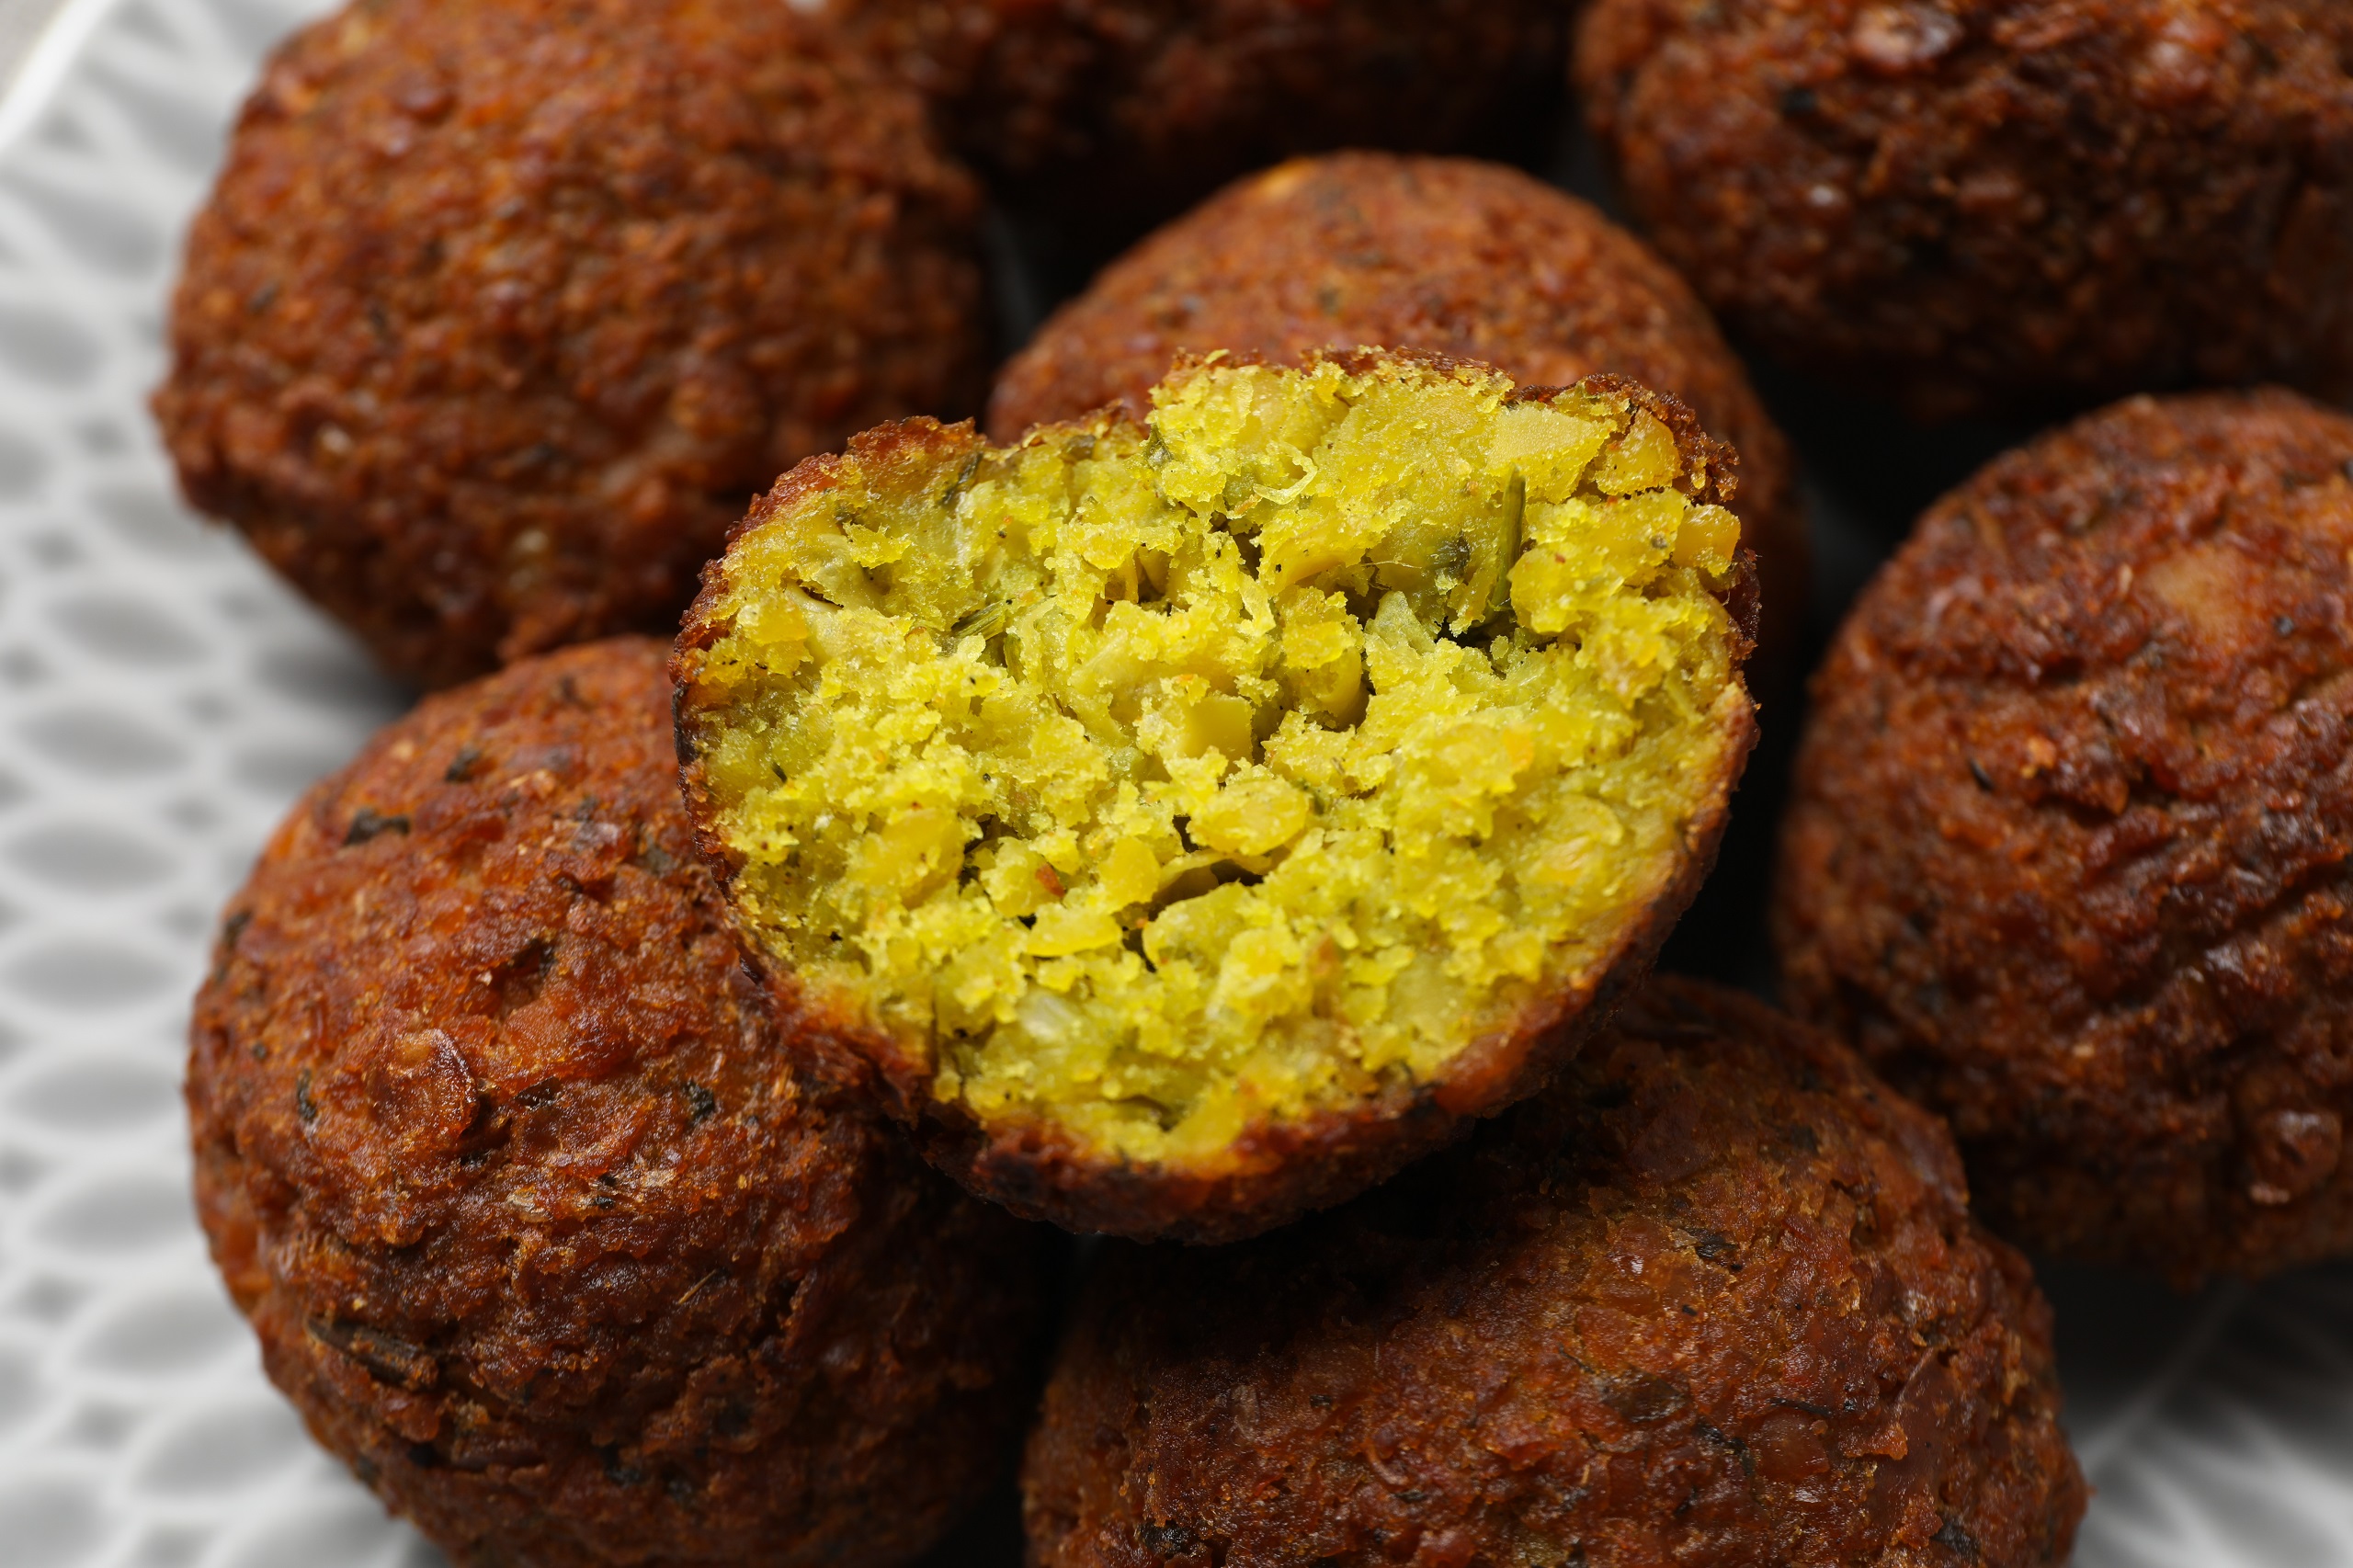 Crunchy falafel balls piled up on a fancy plate with half a falafel ball on the top depicting the soft chickpea filling inside.